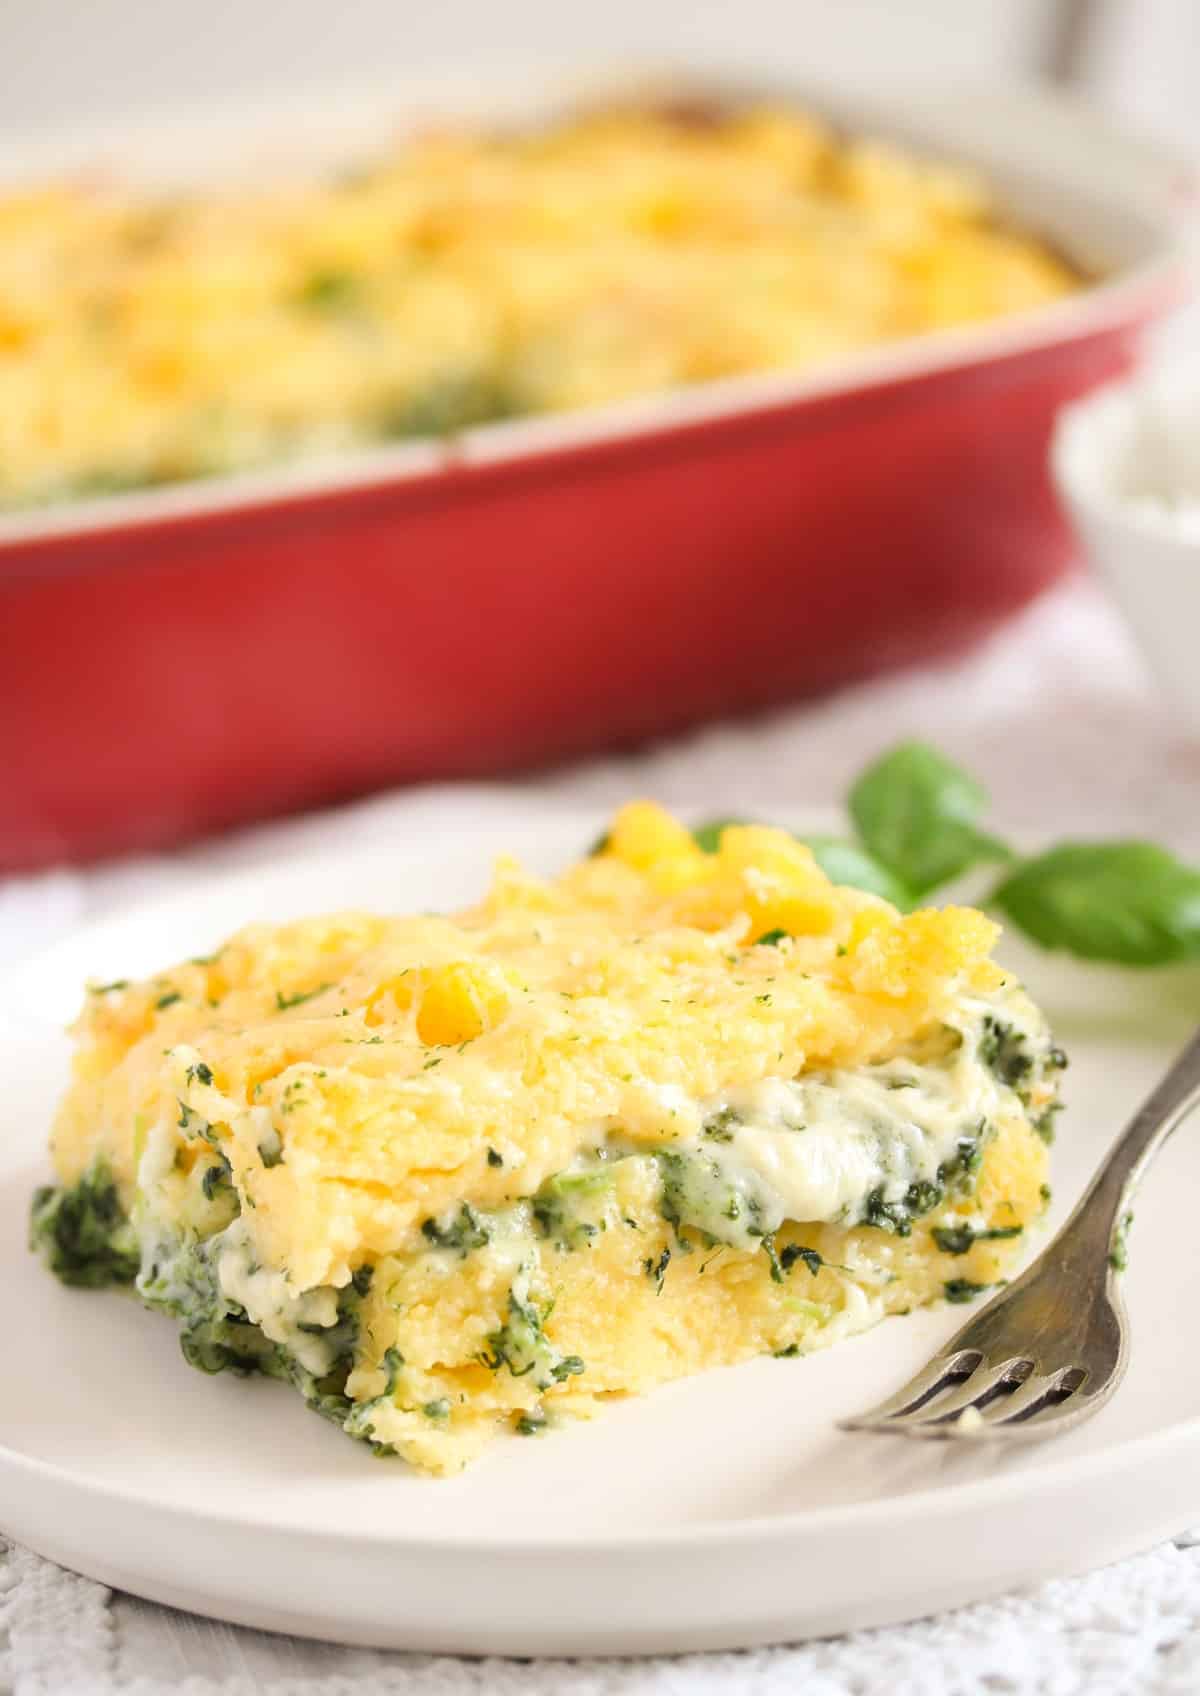 slice of polenta and spinach bake with a red casserole dish behind it.